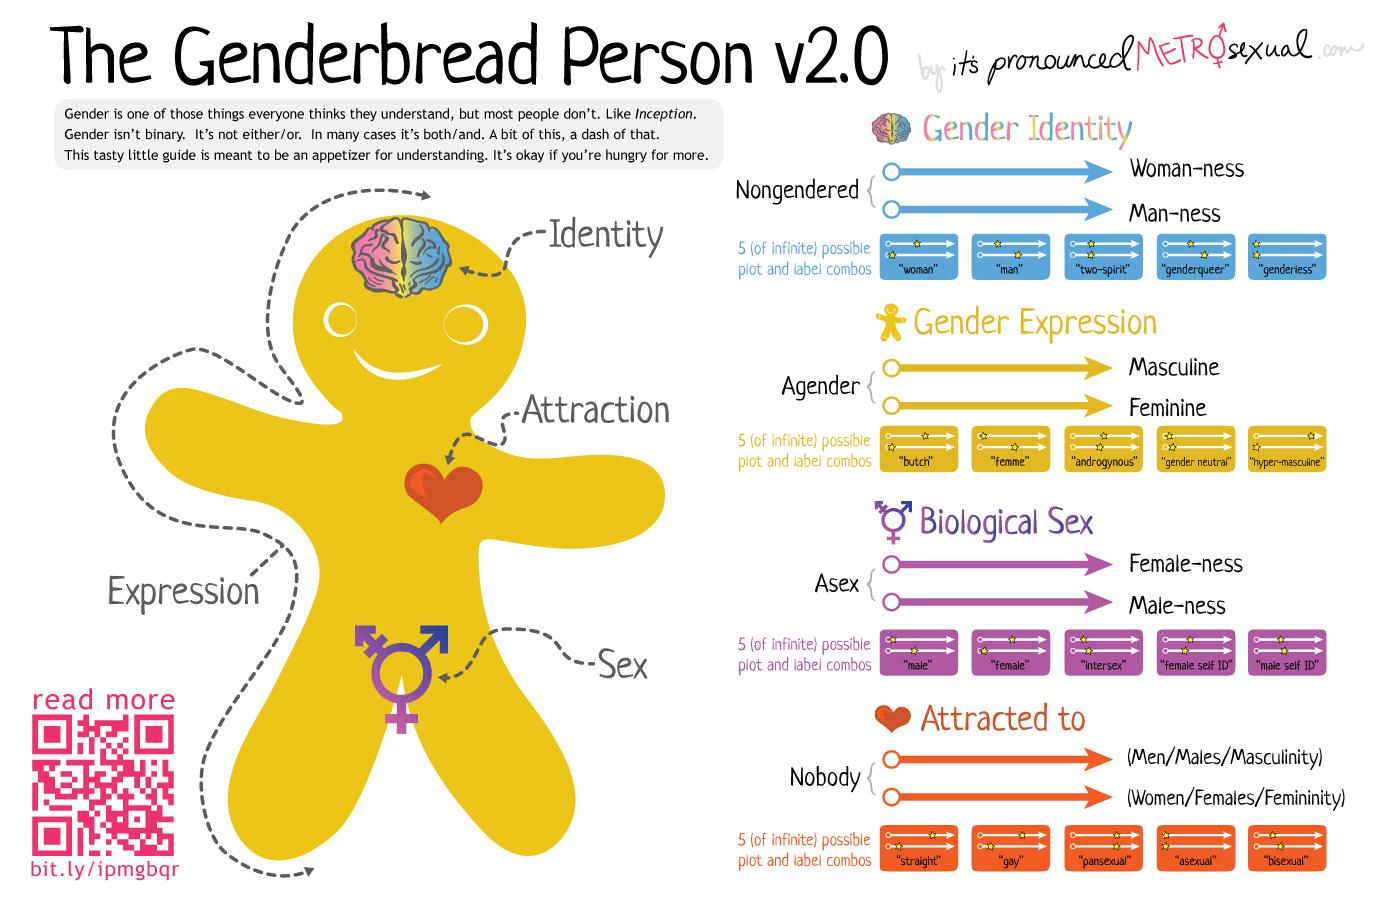 The Genderbread Person v2.0: An illustration of a gingerbread man showing the different spectrums of gender identity, gender expression, biological sex, and attraction.